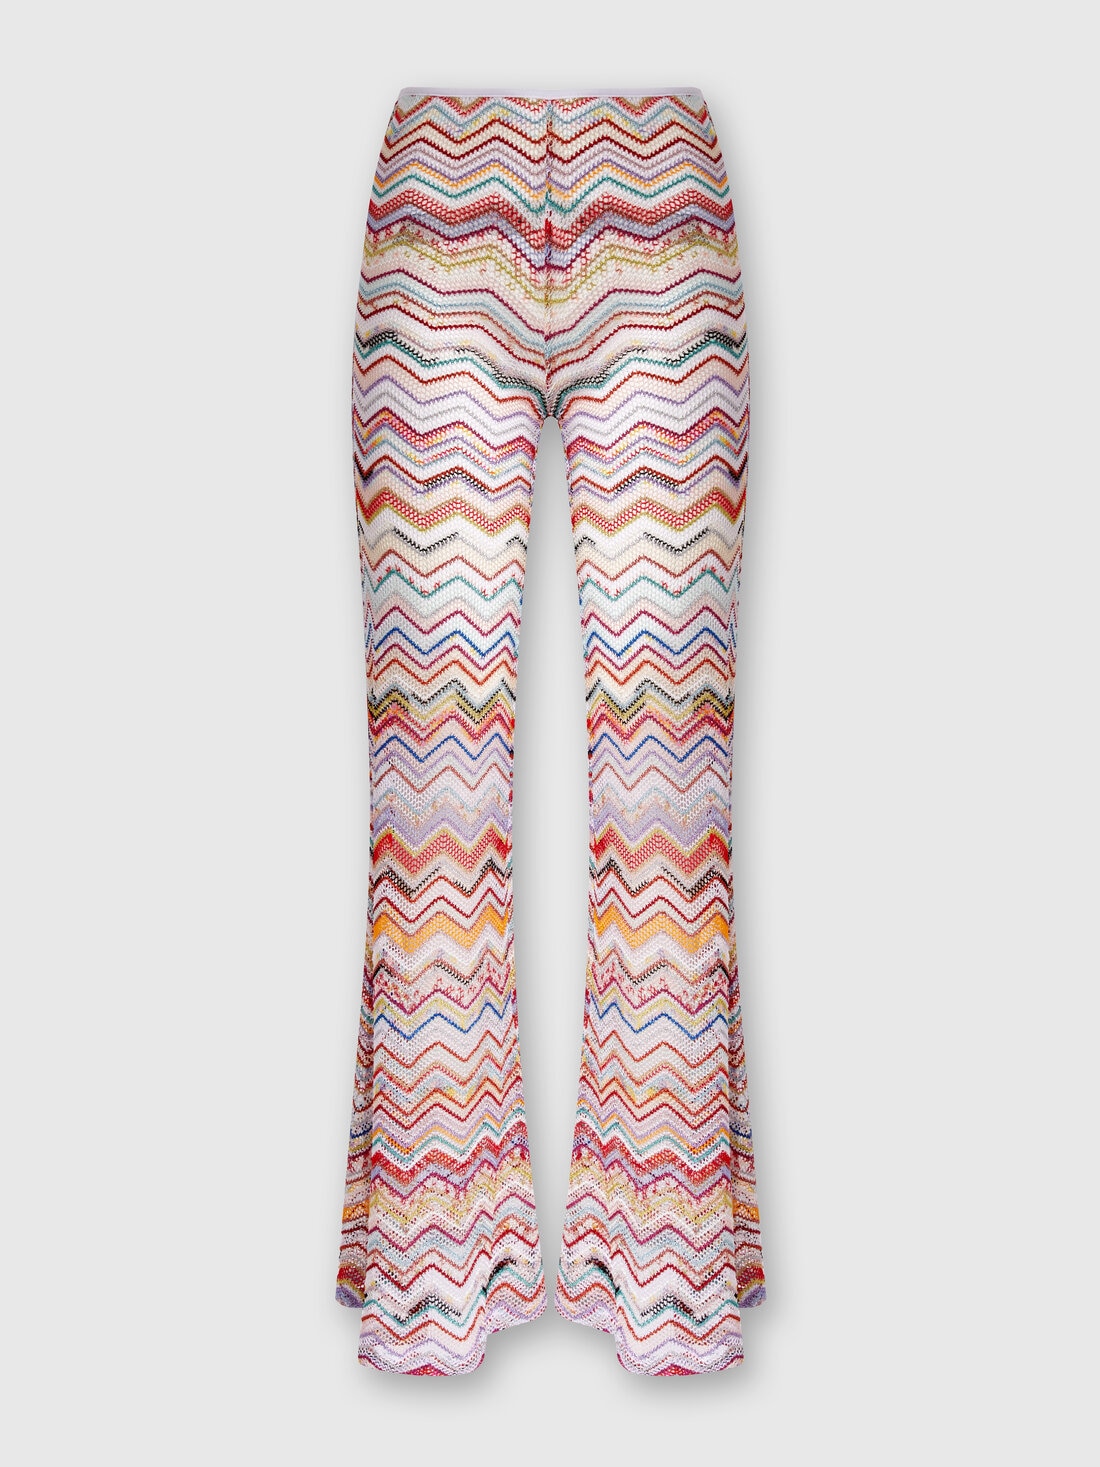 Flared trousers in zigzag crochet with lurex, Multicoloured  - MS24SI00BR00TISM99I - 0